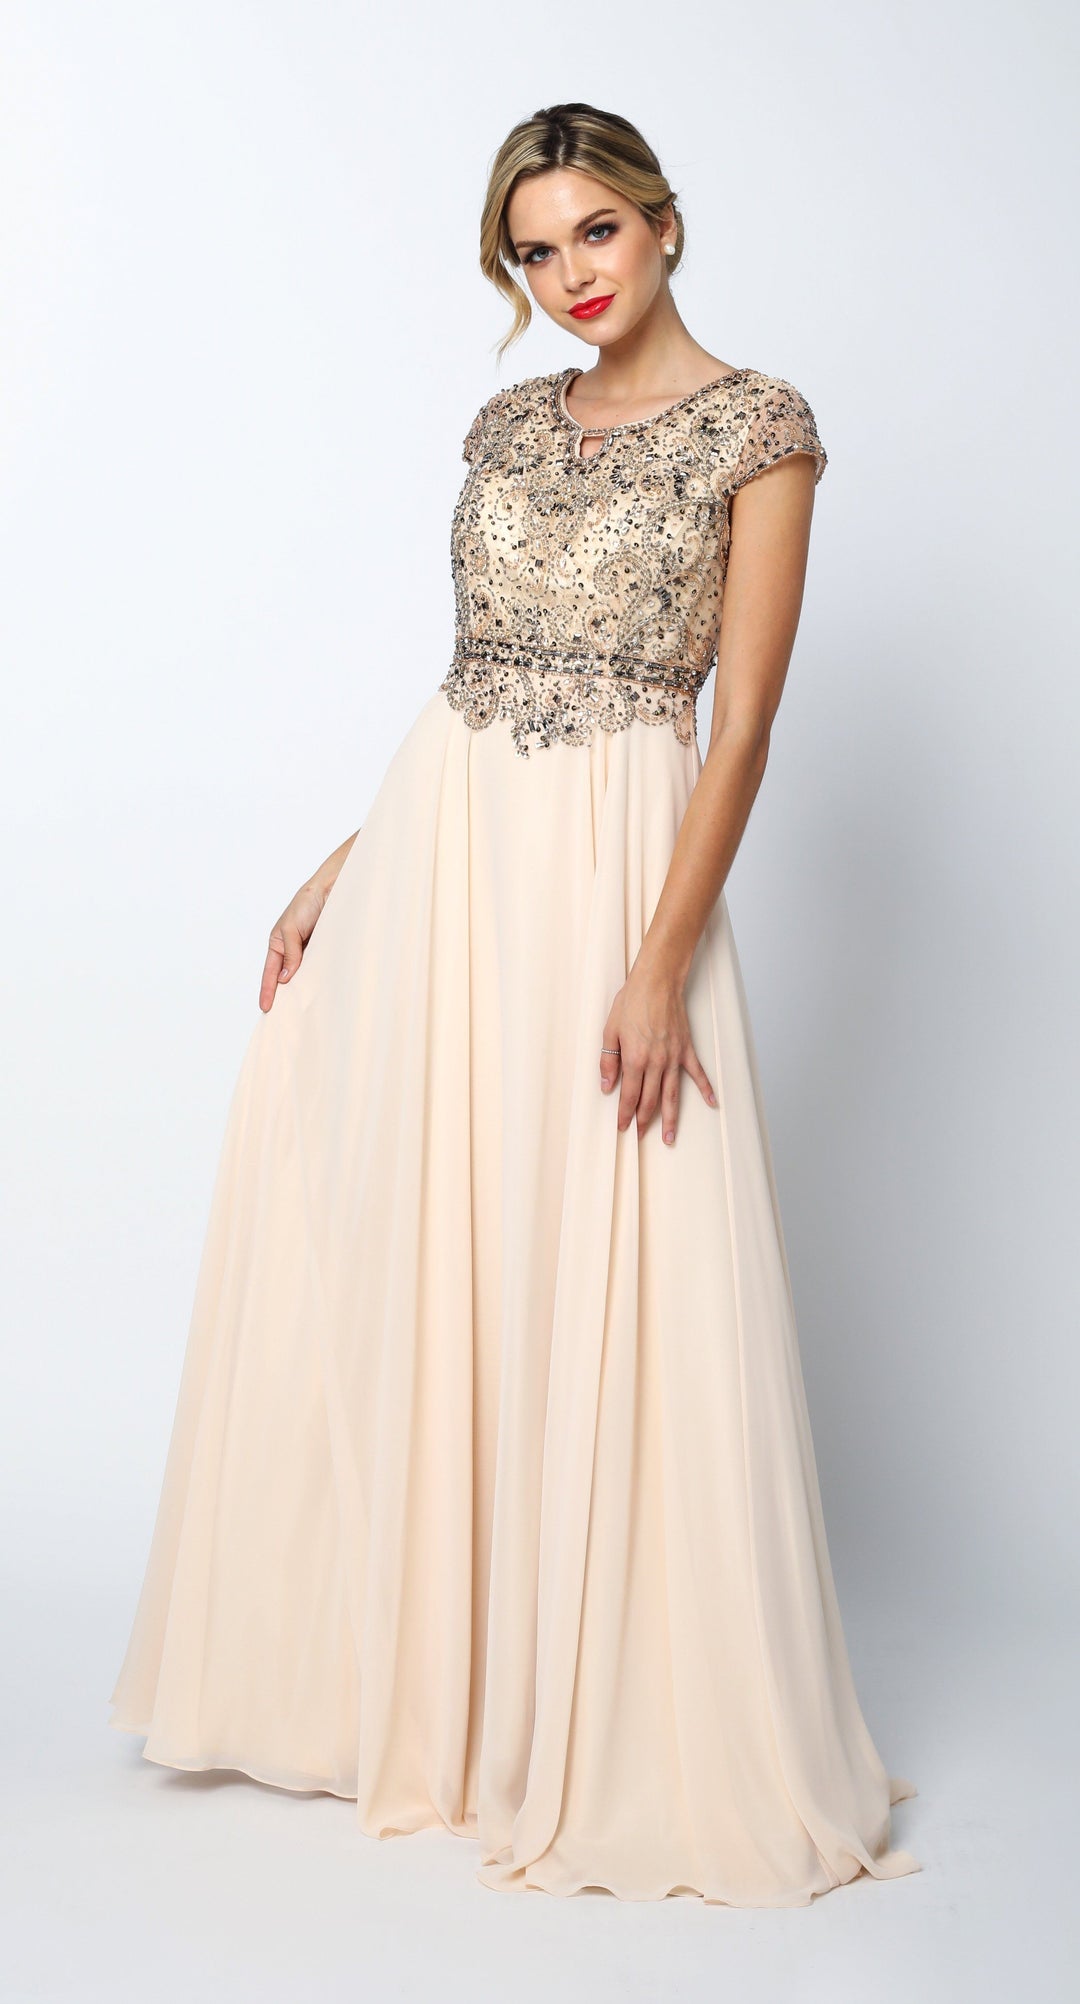 Long Cap Sleeve Chiffon Dress with Beaded Bodice by Juliet 657-Long Formal Dresses-ABC Fashion